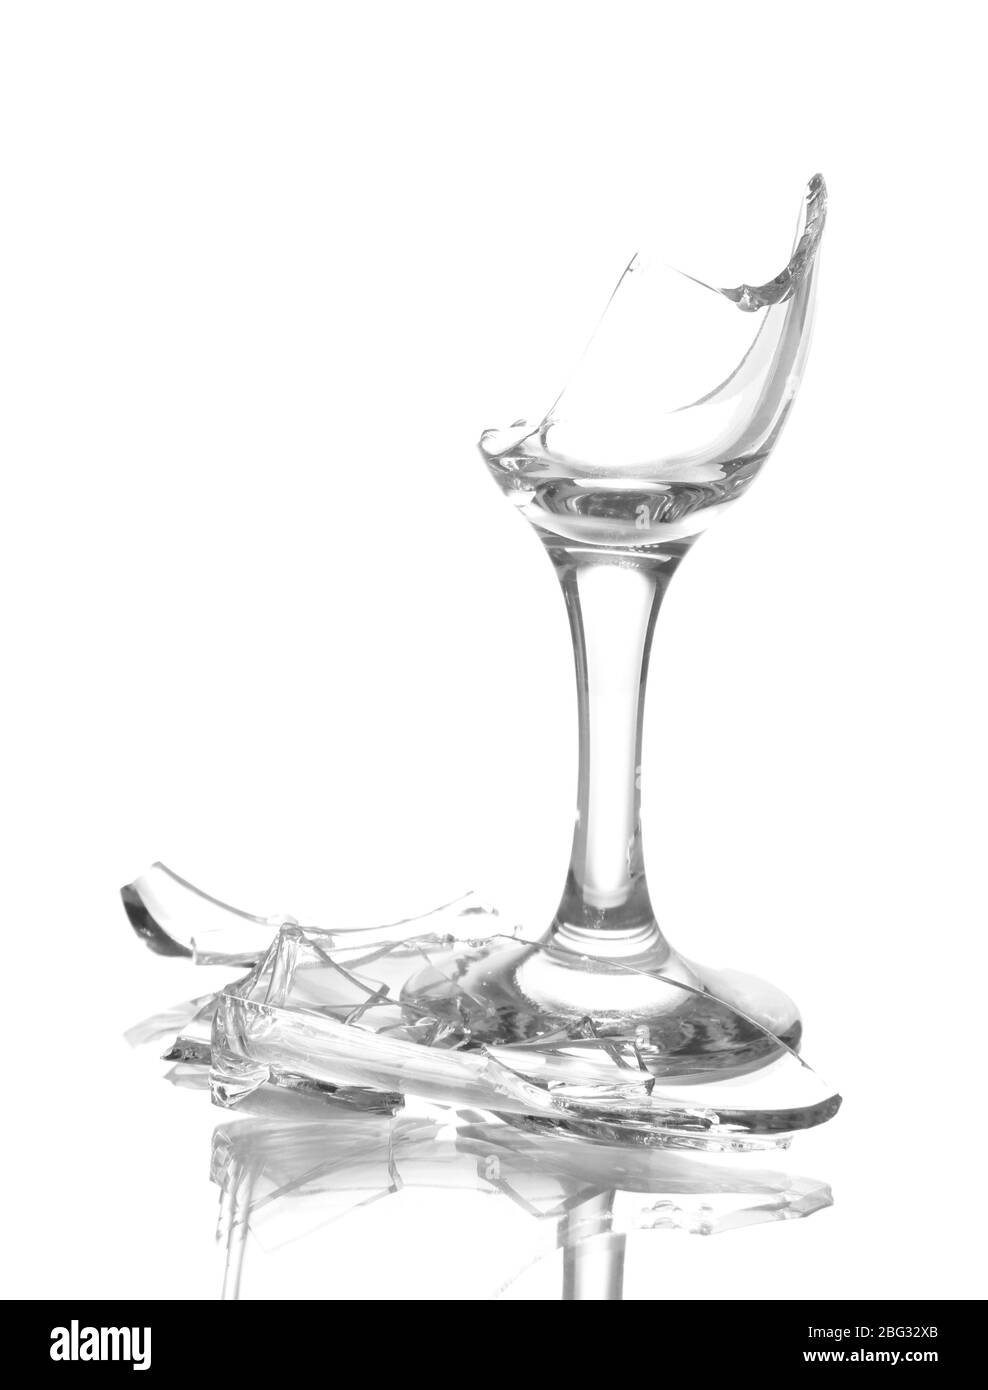 Verre brisé isolated on white Banque D'Images